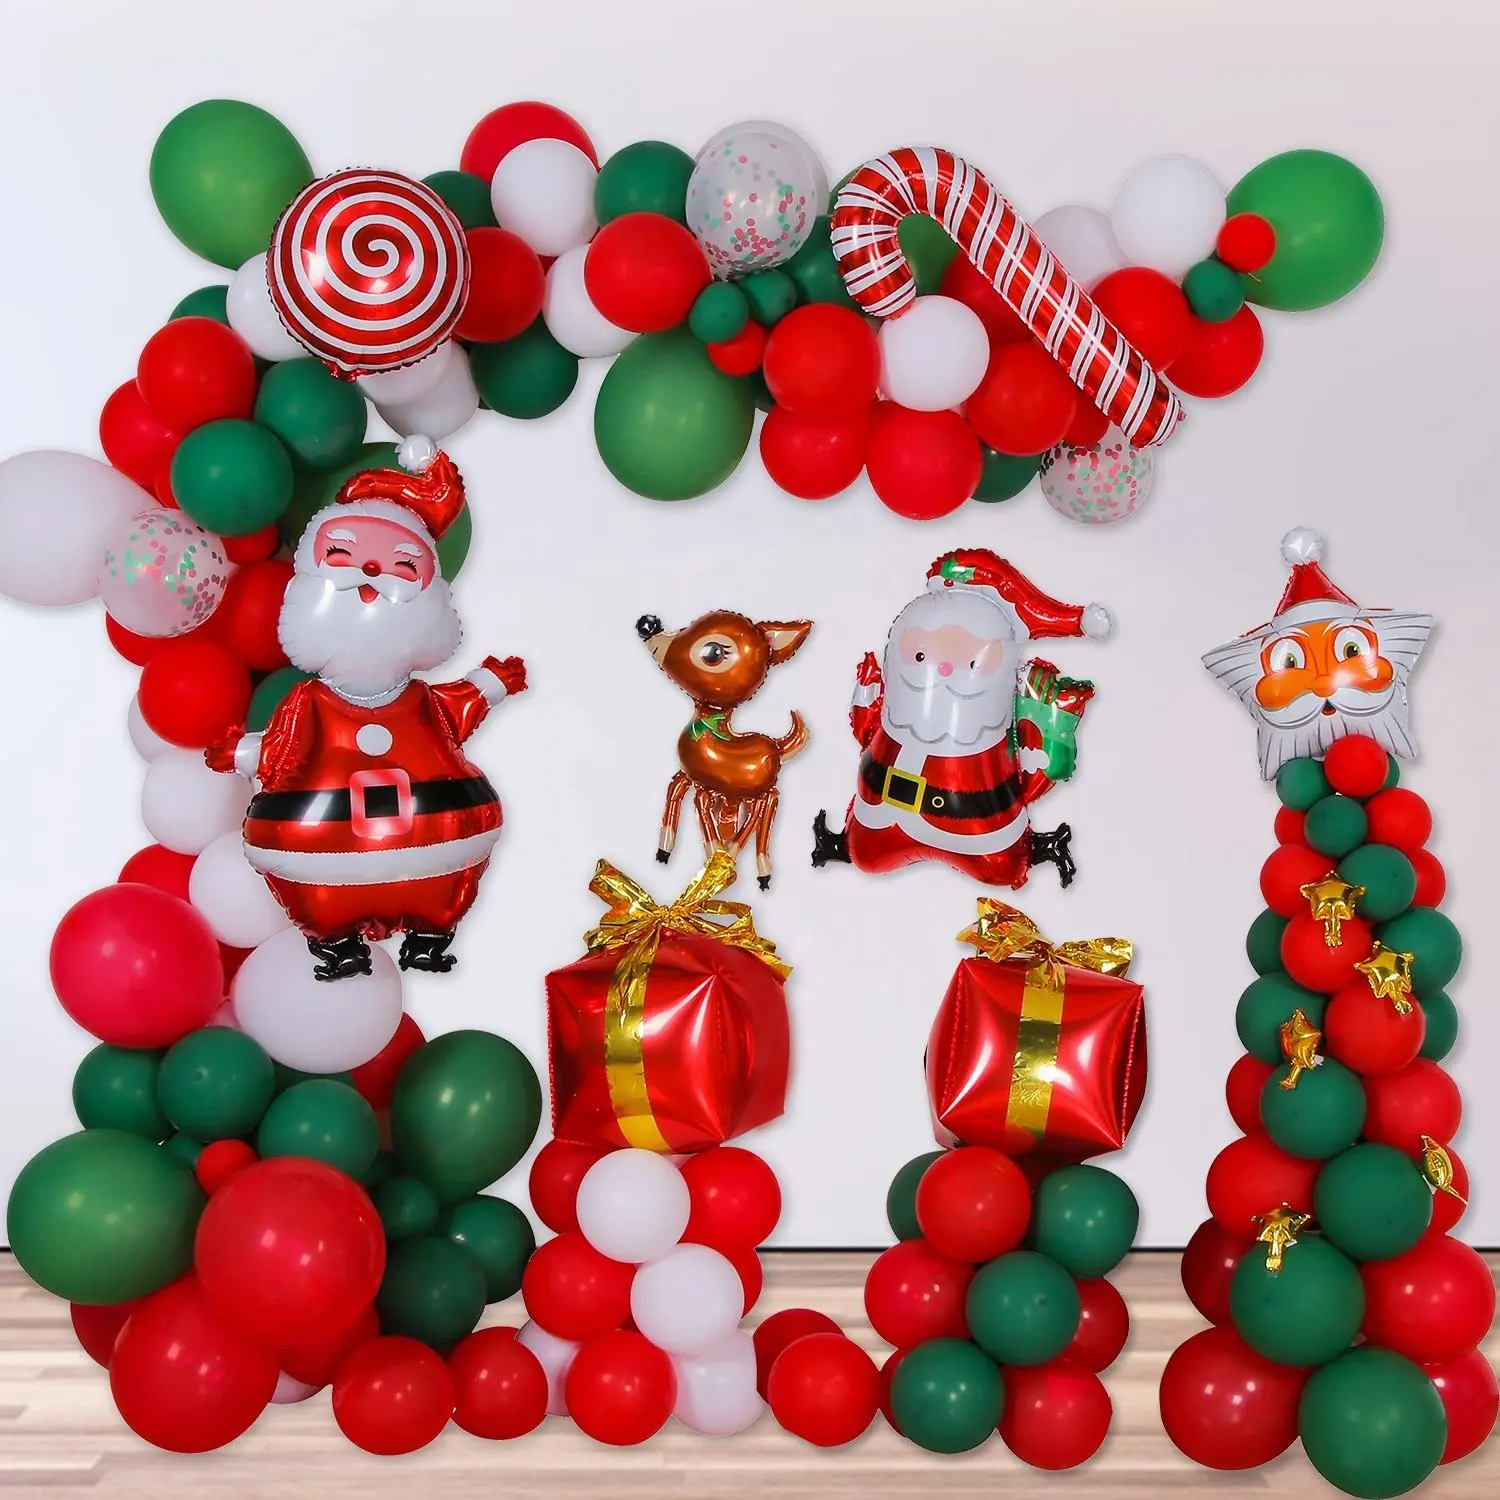 Arches Decorating Balloons 151pcs Christmas Red Candy Balloons Gift Box Santa Claus Balloons Garland Arch Party Decorations Kit